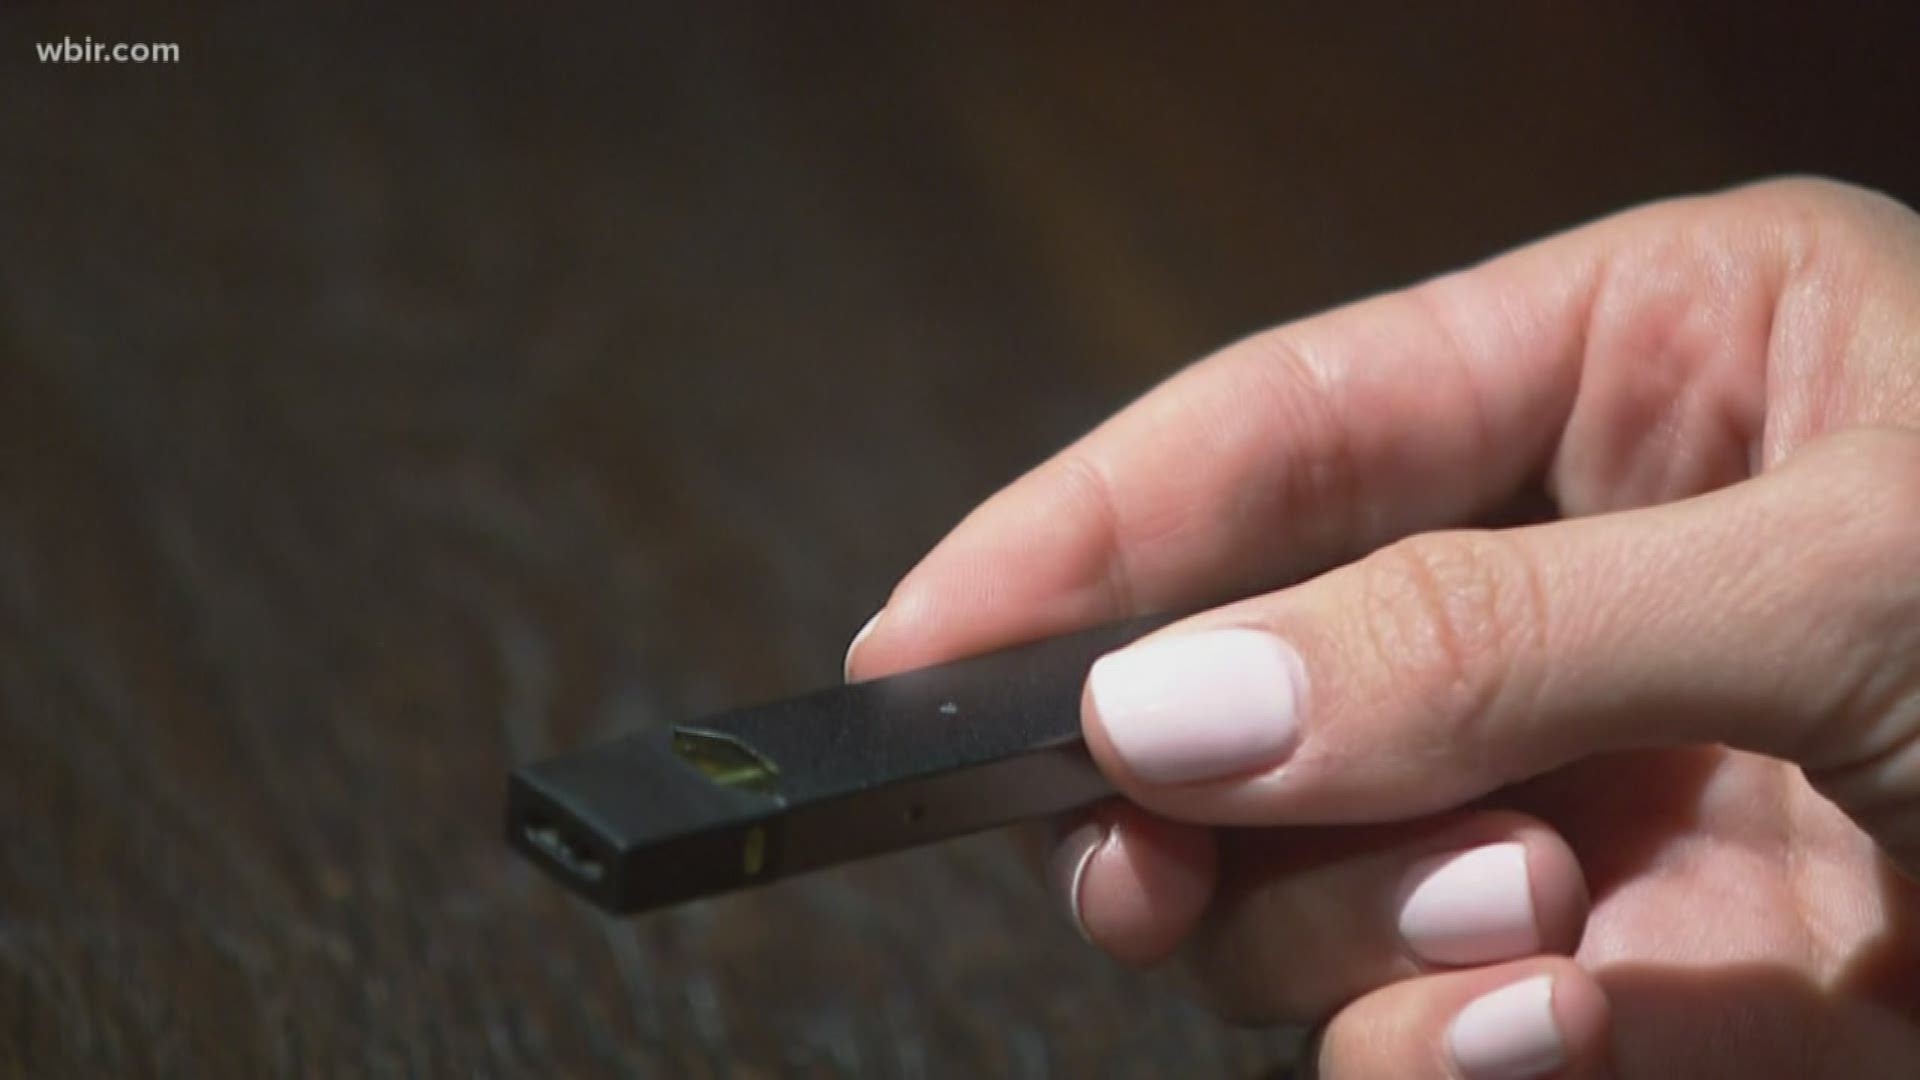 10News at 6: New warnings from a national expert on vaping and the the signs all parents need to know, plus big changes are coming to an iconic Knoxville building.